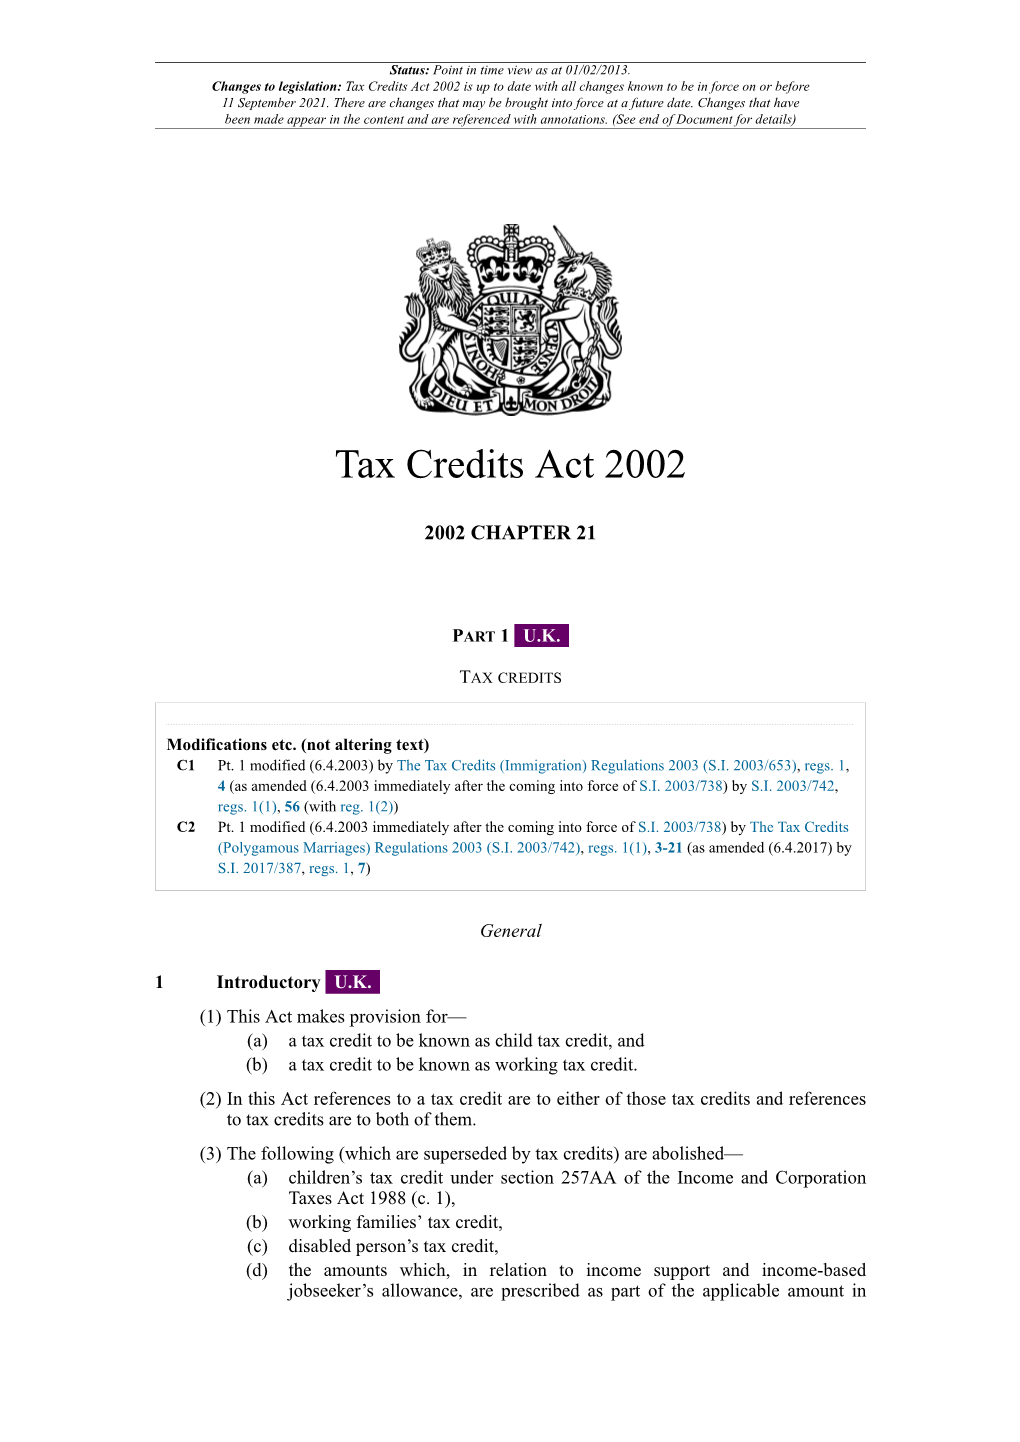 Tax Credits Act 2002 Is up to Date with All Changes Known to Be in Force on Or Before 11 September 2021